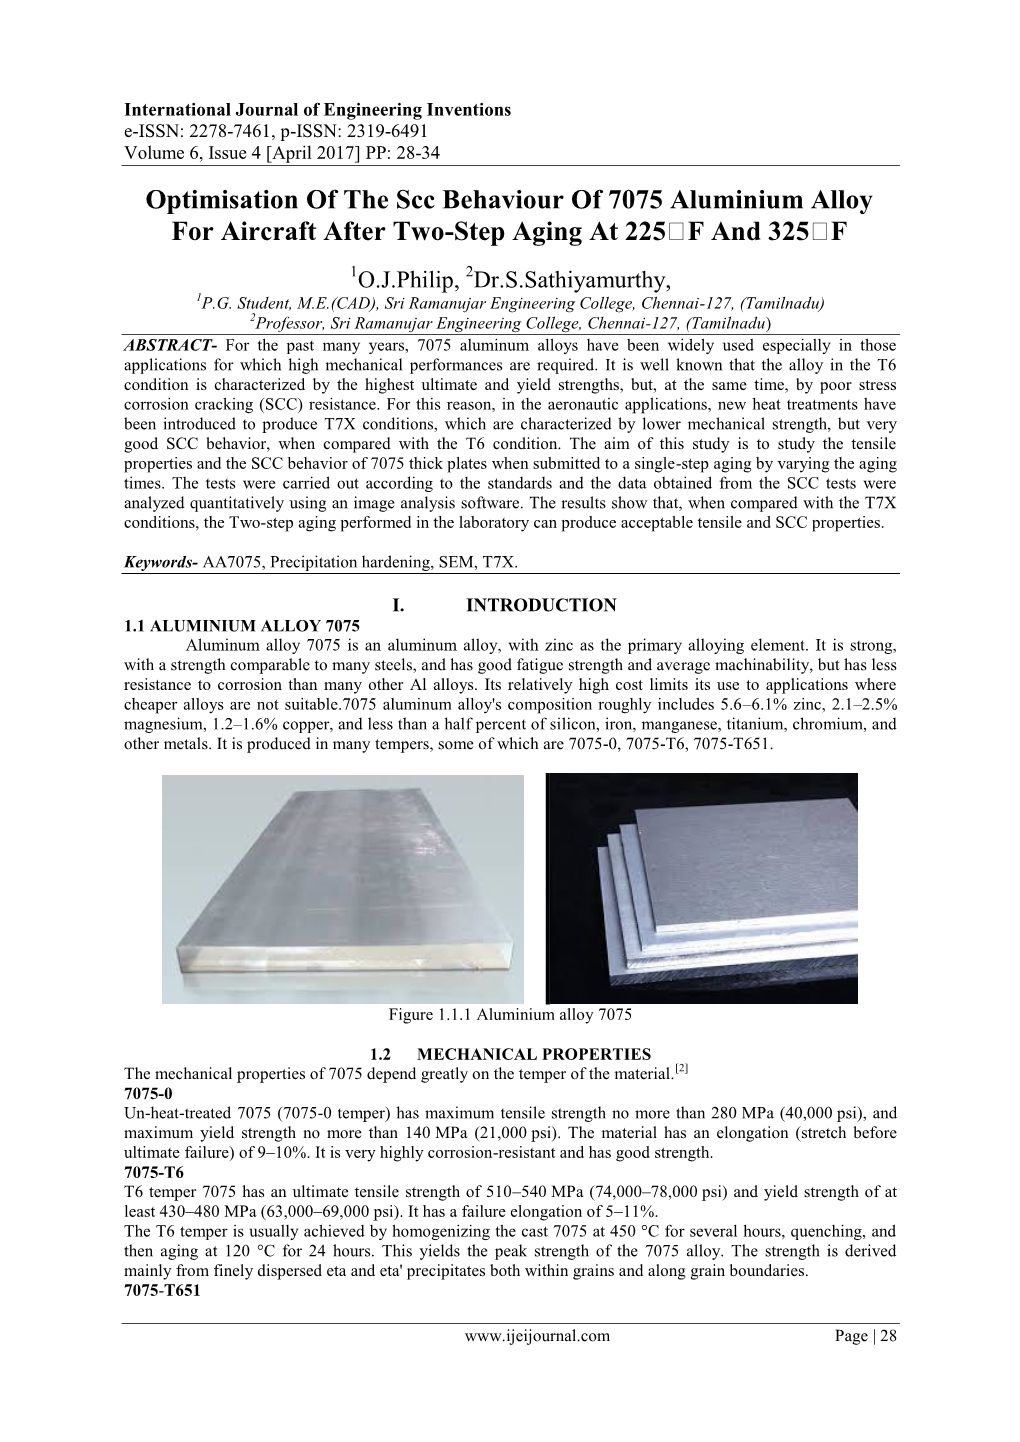 Optimisation of the Scc Behaviour of 7075 Aluminium Alloy for Aircraft After Two-Step Aging at 225˚F and 325˚F